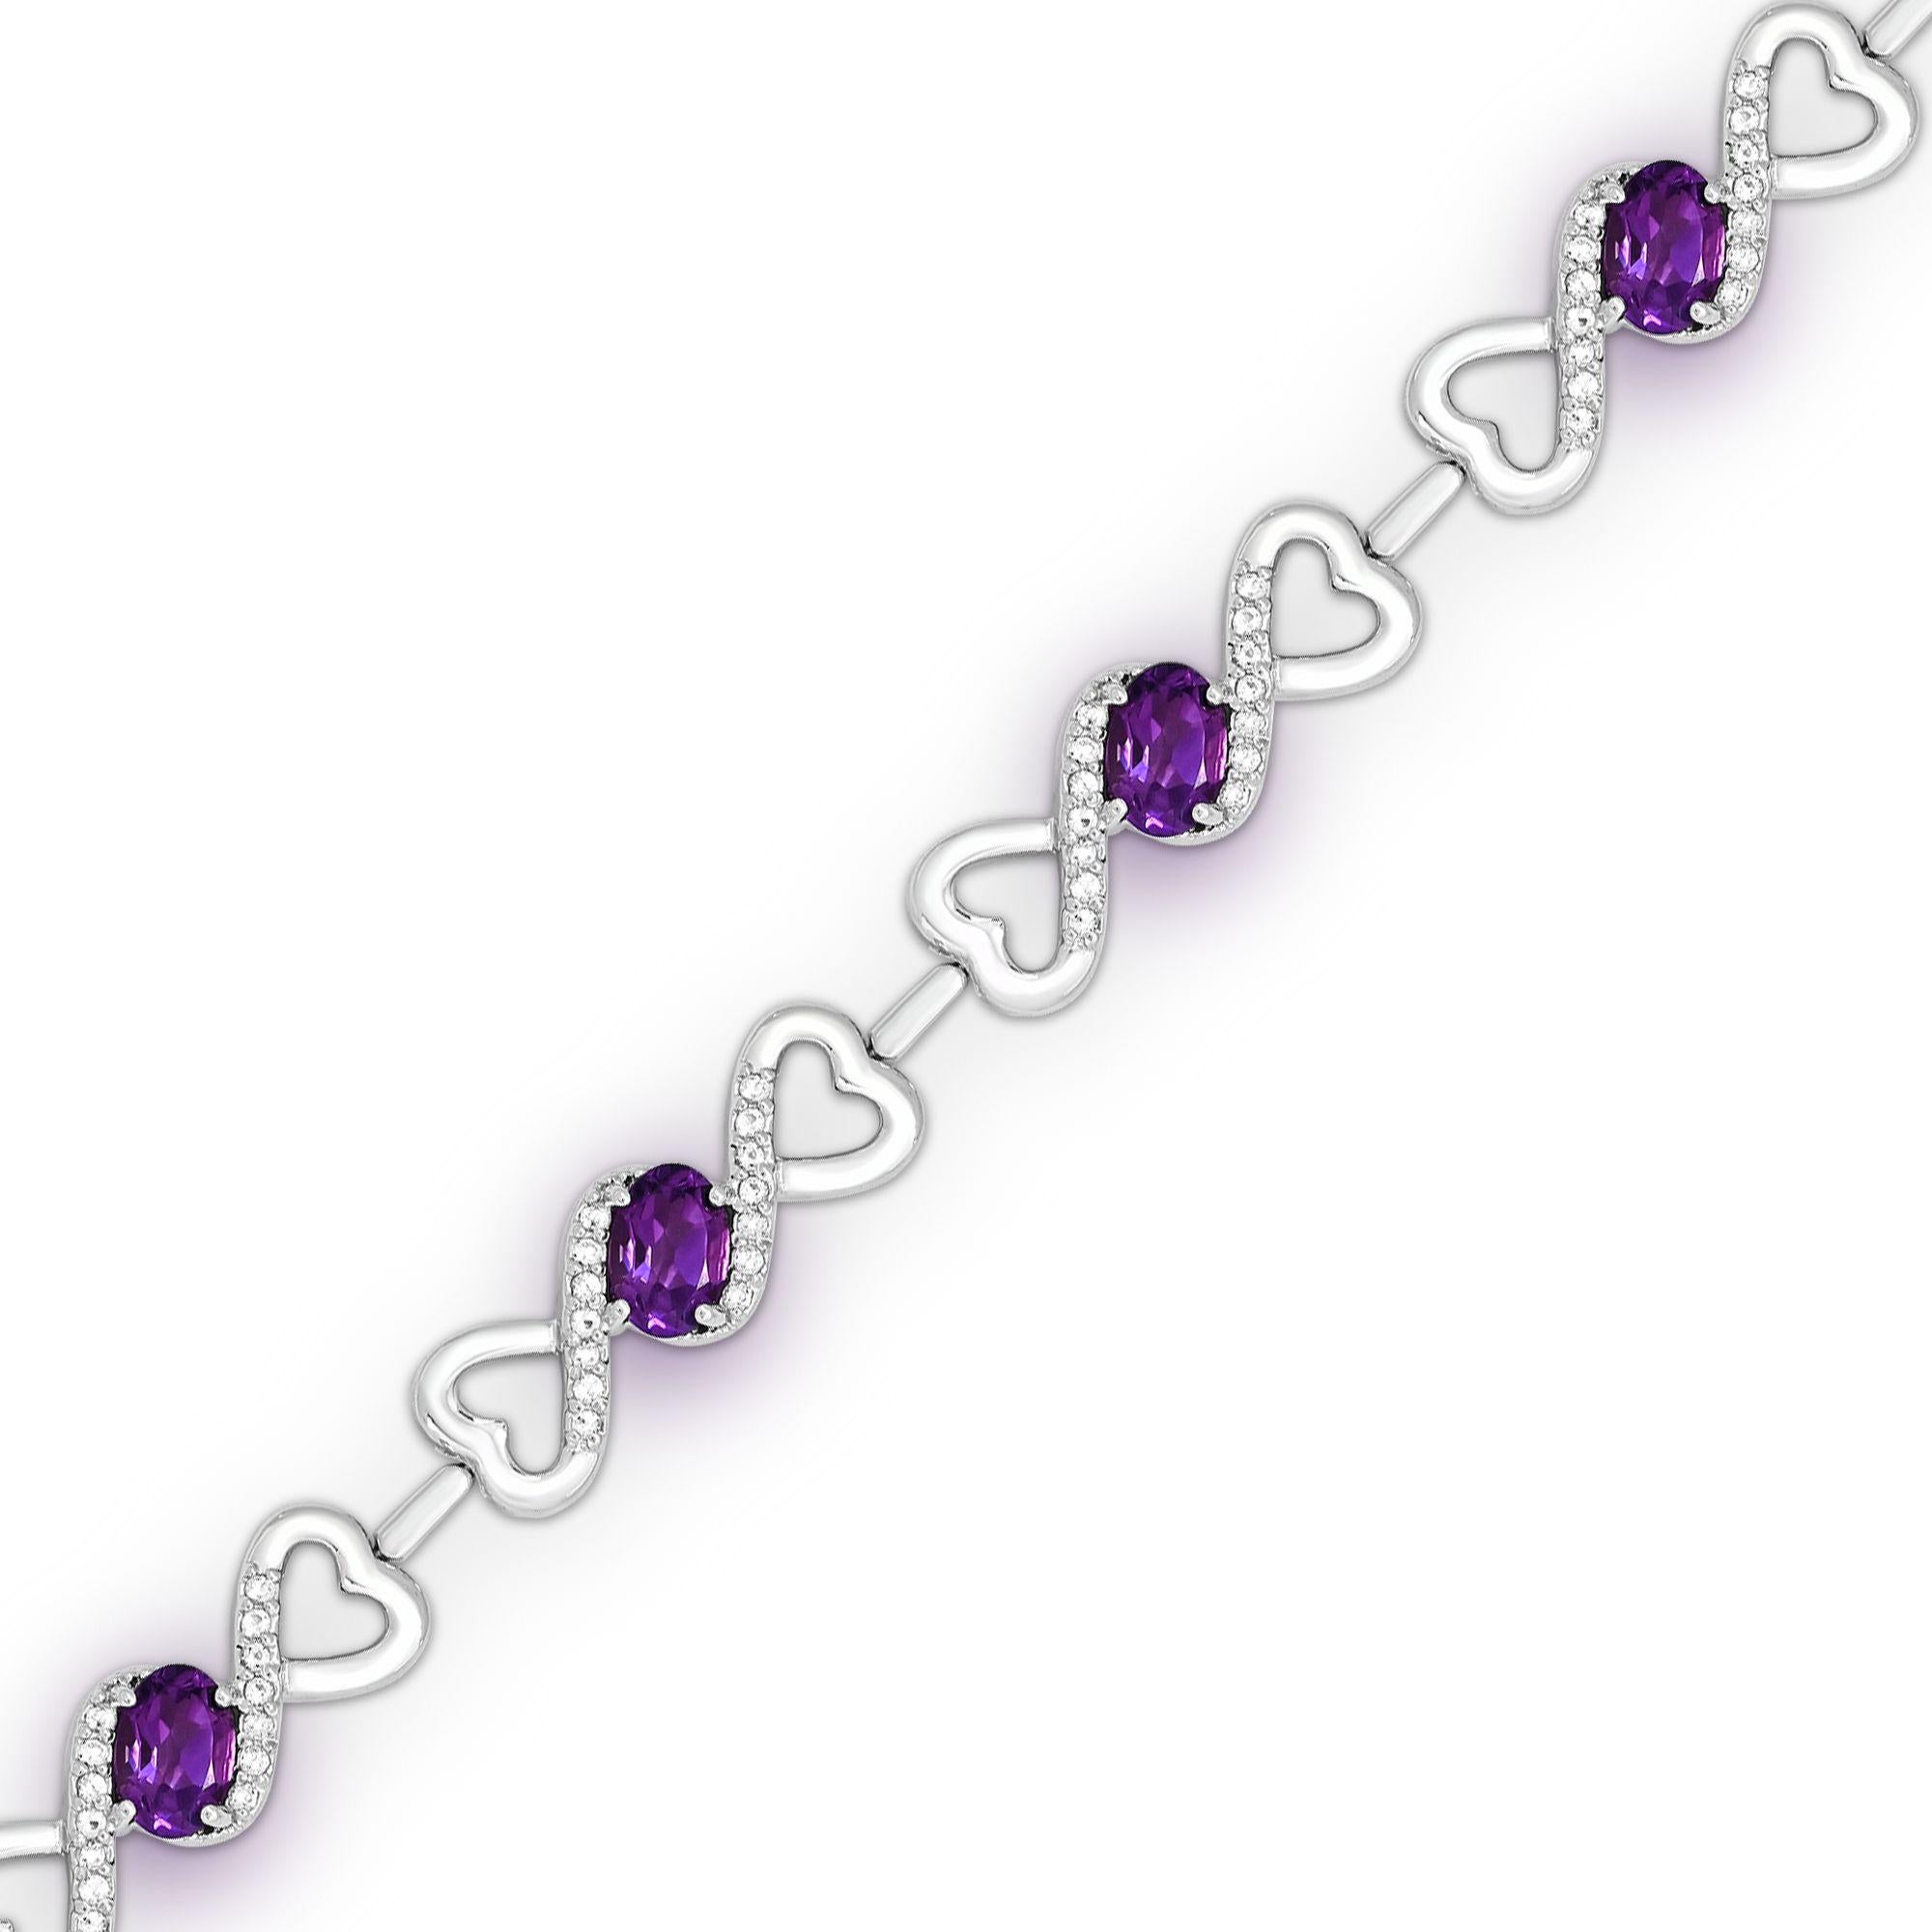 This stunning bracelet features 7 oval-cut amethysts accented by round white topaz gemstones, delicately set in high-quality sterling silver creative double-open heart chains with a secure lobster closure. This bracelet is not only beautiful but